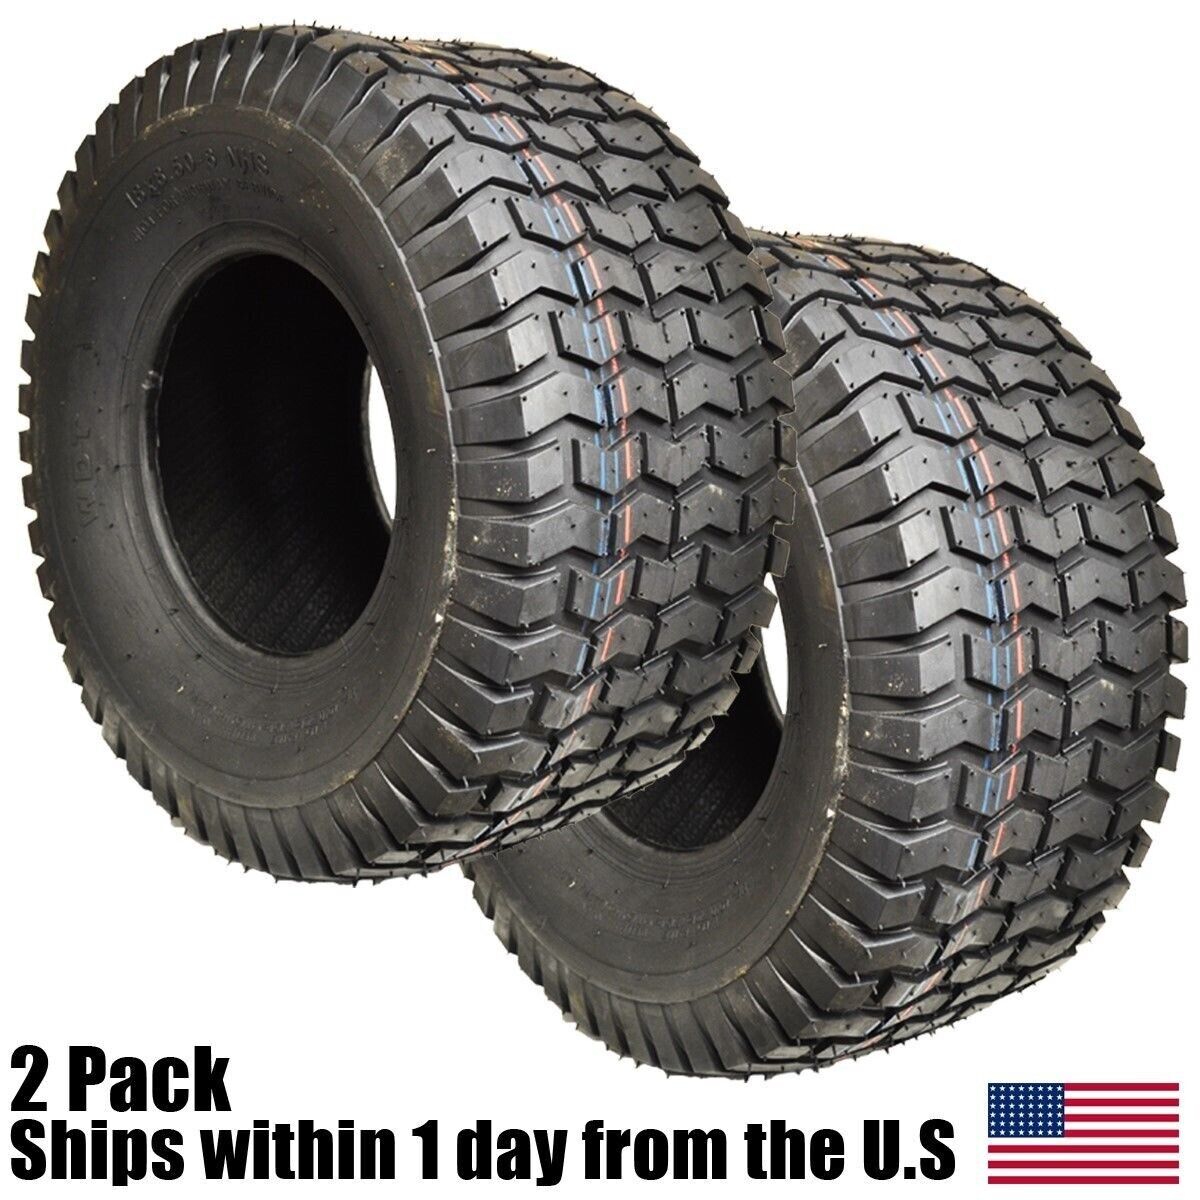 2PK Lawn Mower Turf Tire 23x9.50-12 4 PLY for Scag 484466